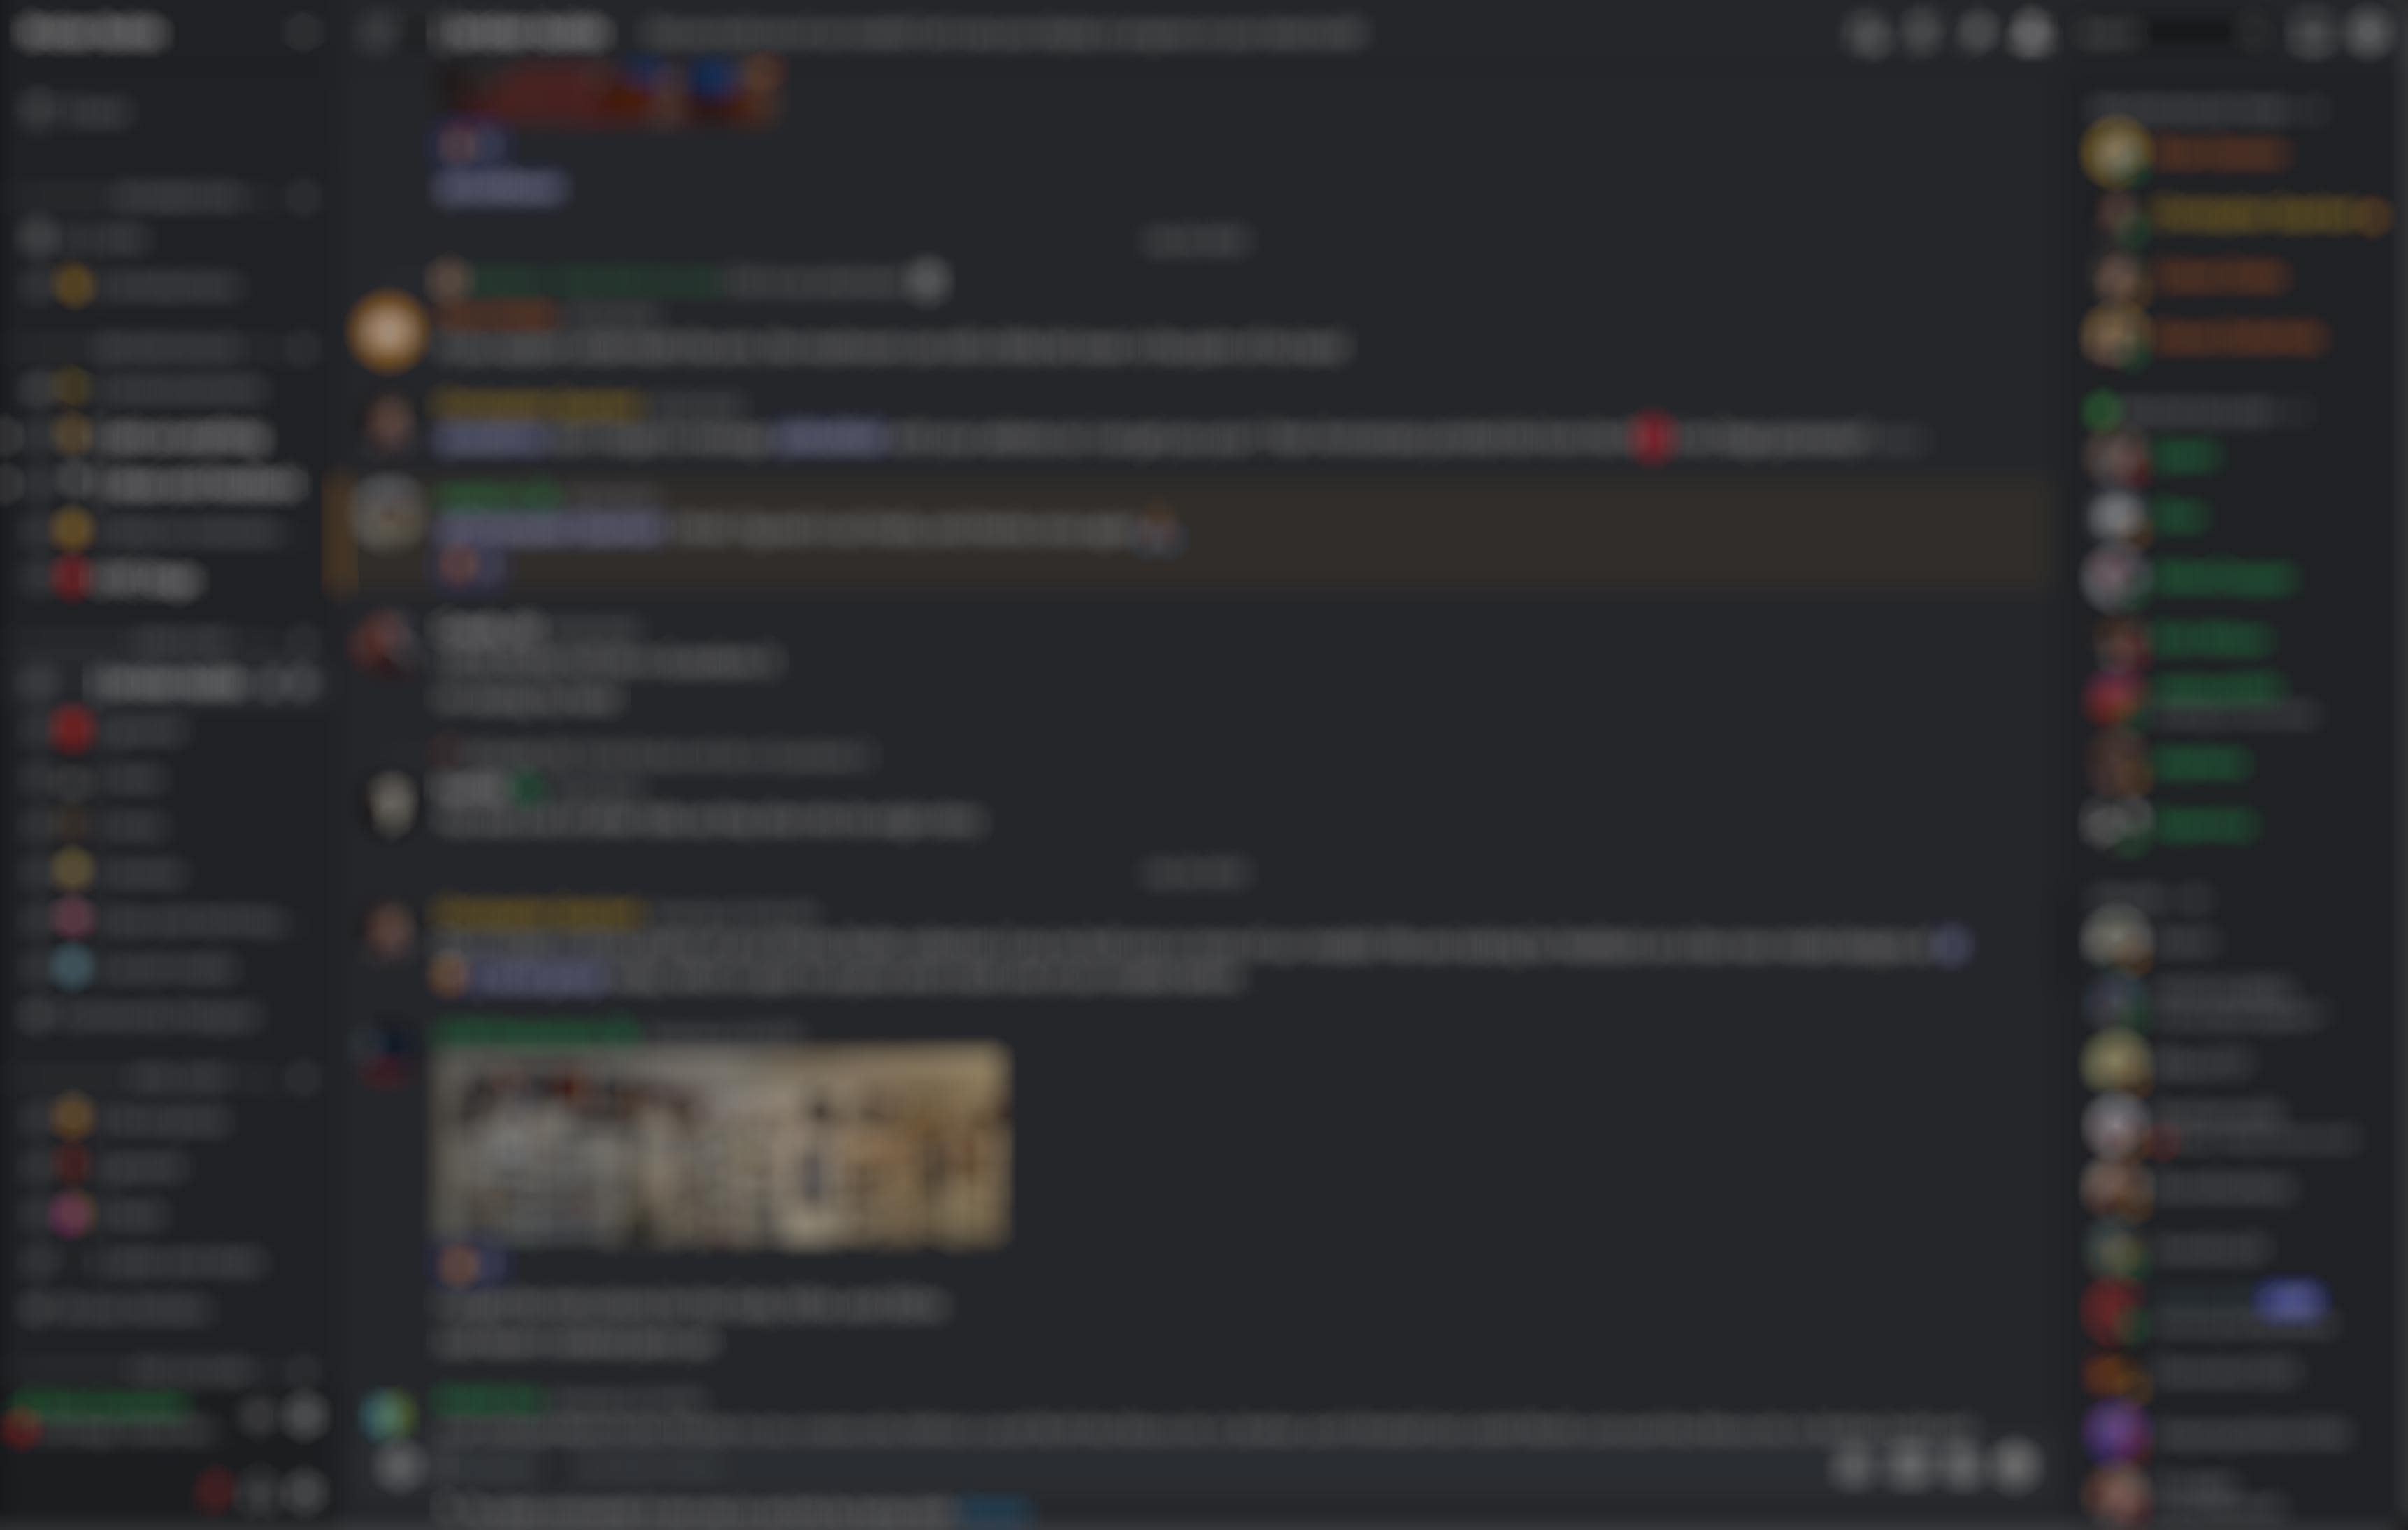 blurred out screenshot of discord channel